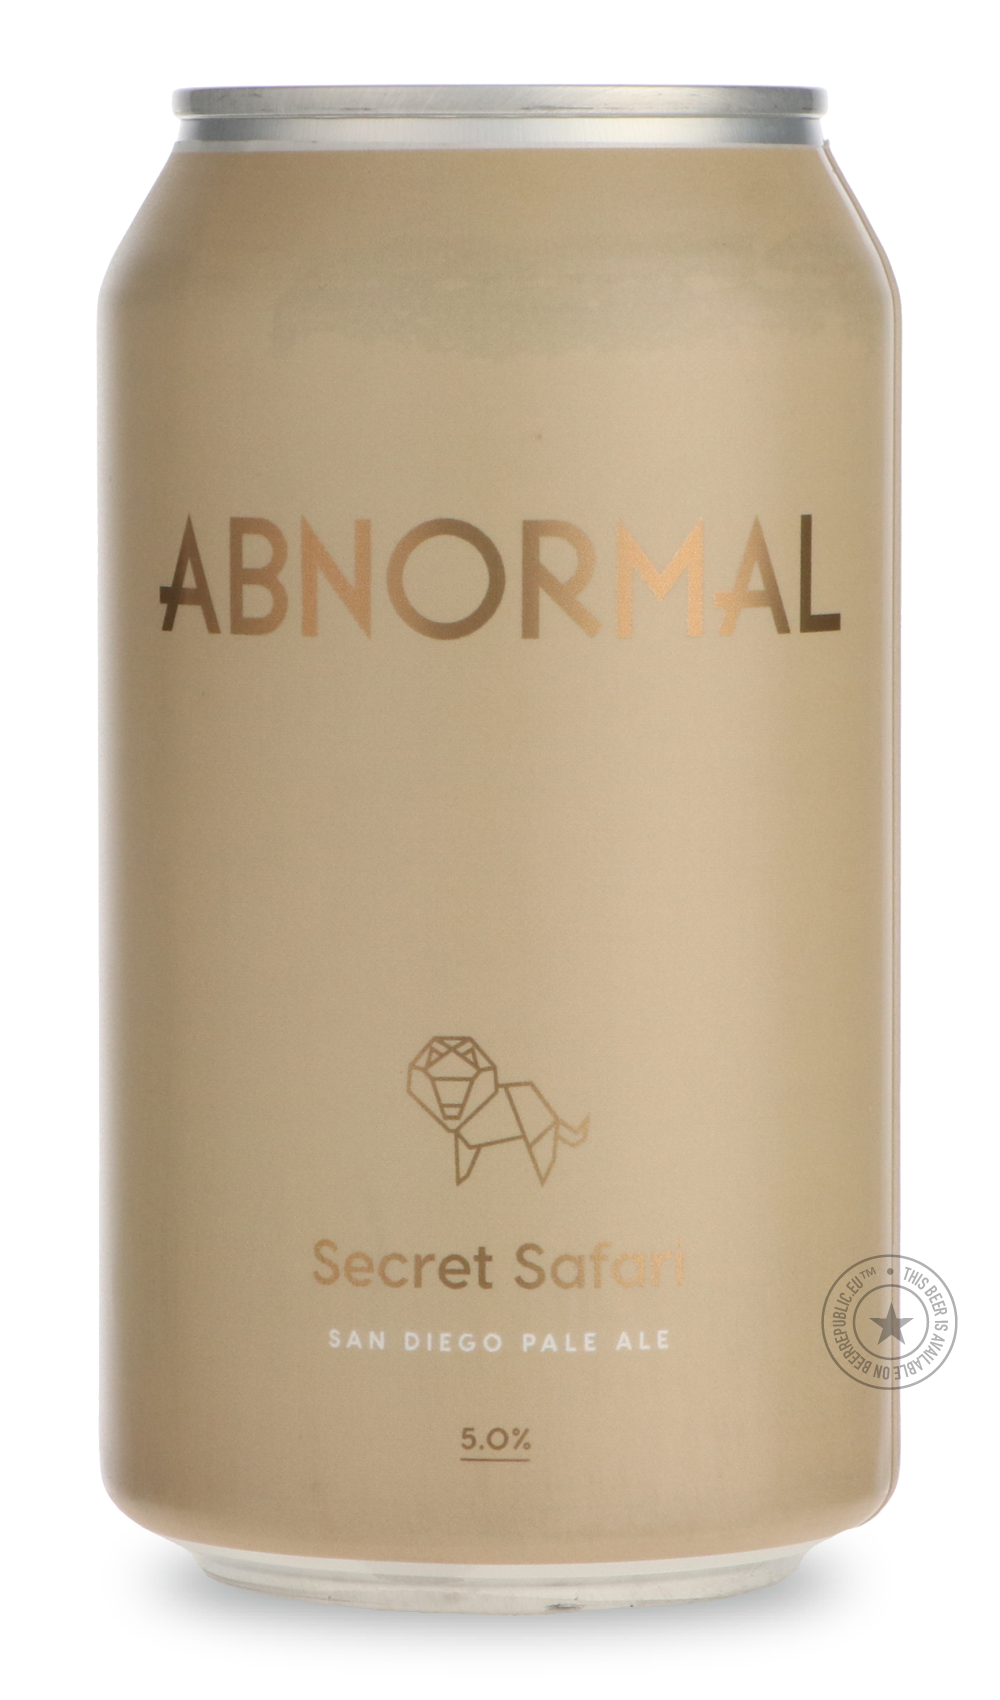 -Abnormal- Secret Safari-Pale- Only @ Beer Republic - The best online beer store for American & Canadian craft beer - Buy beer online from the USA and Canada - Bier online kopen - Amerikaans bier kopen - Craft beer store - Craft beer kopen - Amerikanisch bier kaufen - Bier online kaufen - Acheter biere online - IPA - Stout - Porter - New England IPA - Hazy IPA - Imperial Stout - Barrel Aged - Barrel Aged Imperial Stout - Brown - Dark beer - Blond - Blonde - Pilsner - Lager - Wheat - Weizen - Amber - Barley 